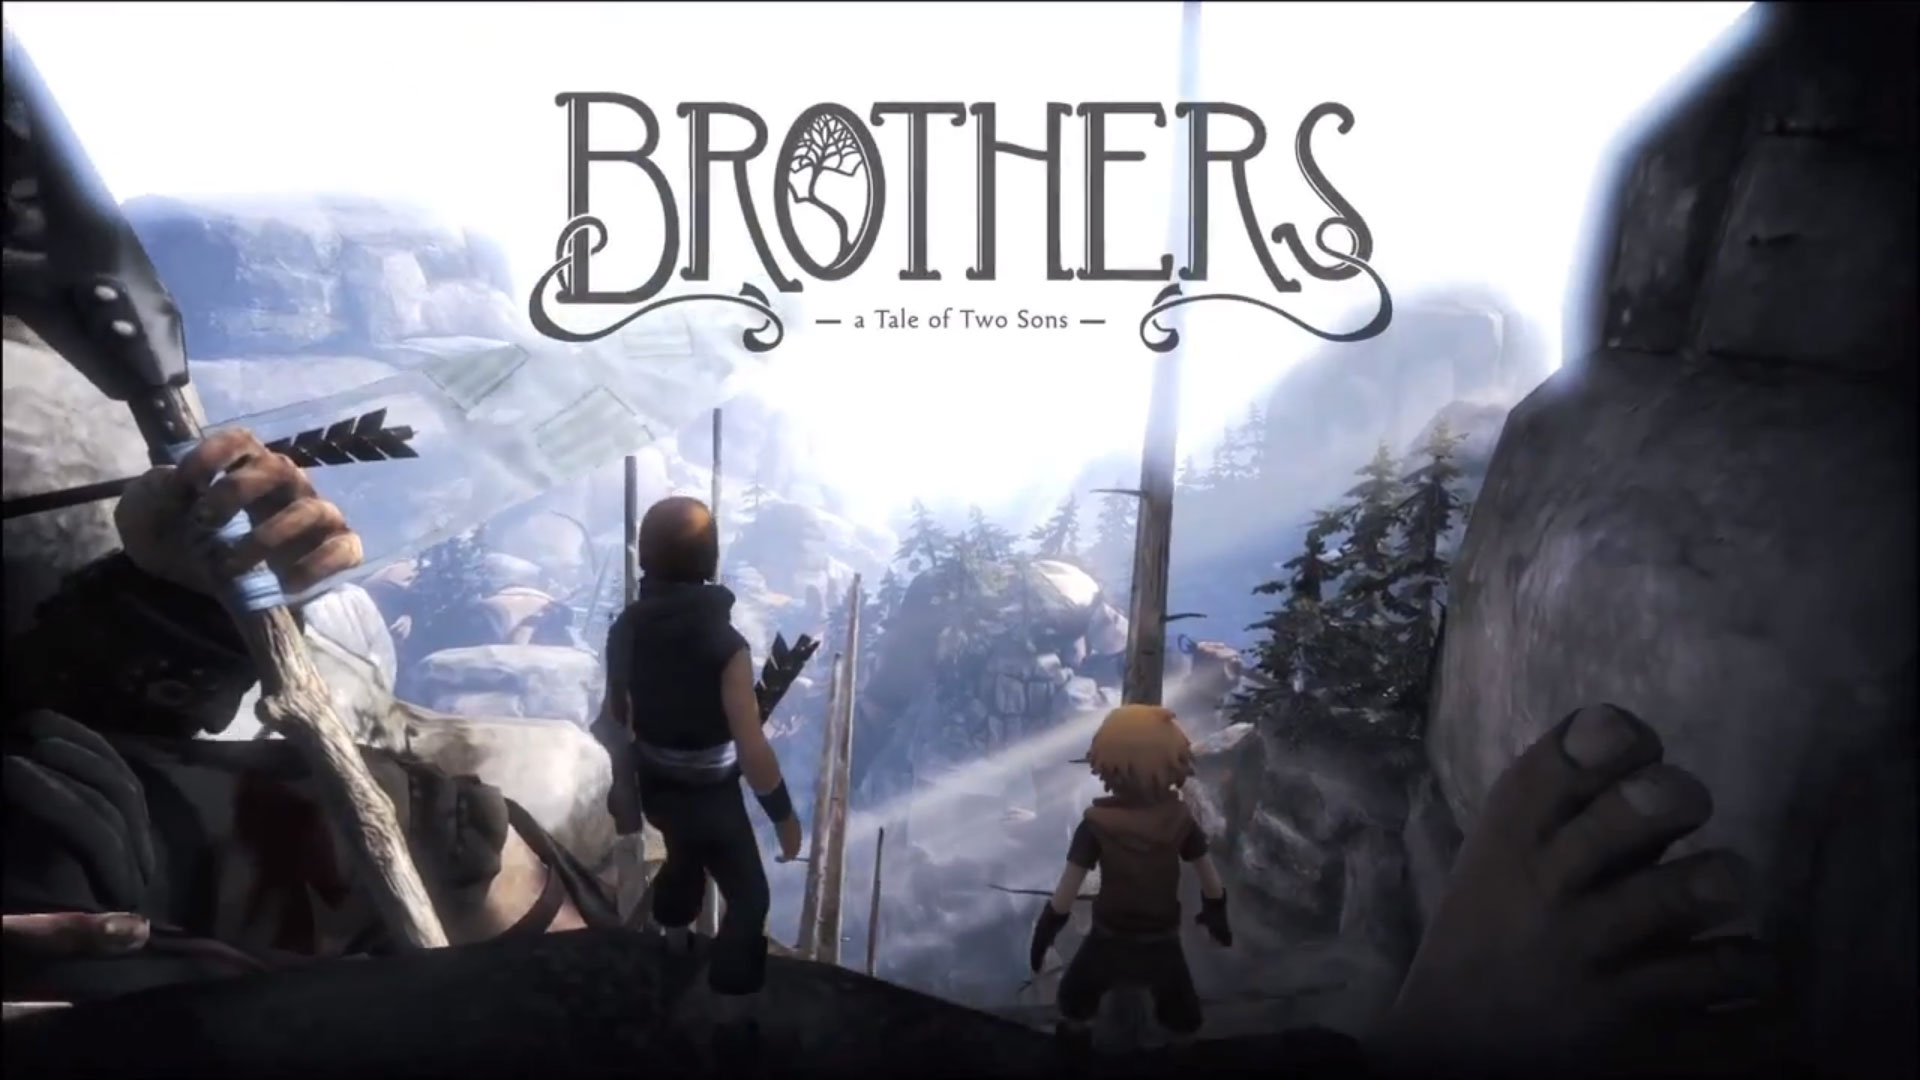 Как пройти игру брат. Brothers: a Tale of two sons обложка. Brothers игра. Игра брат. Brothers: a Tale of two sons (2013) игры.